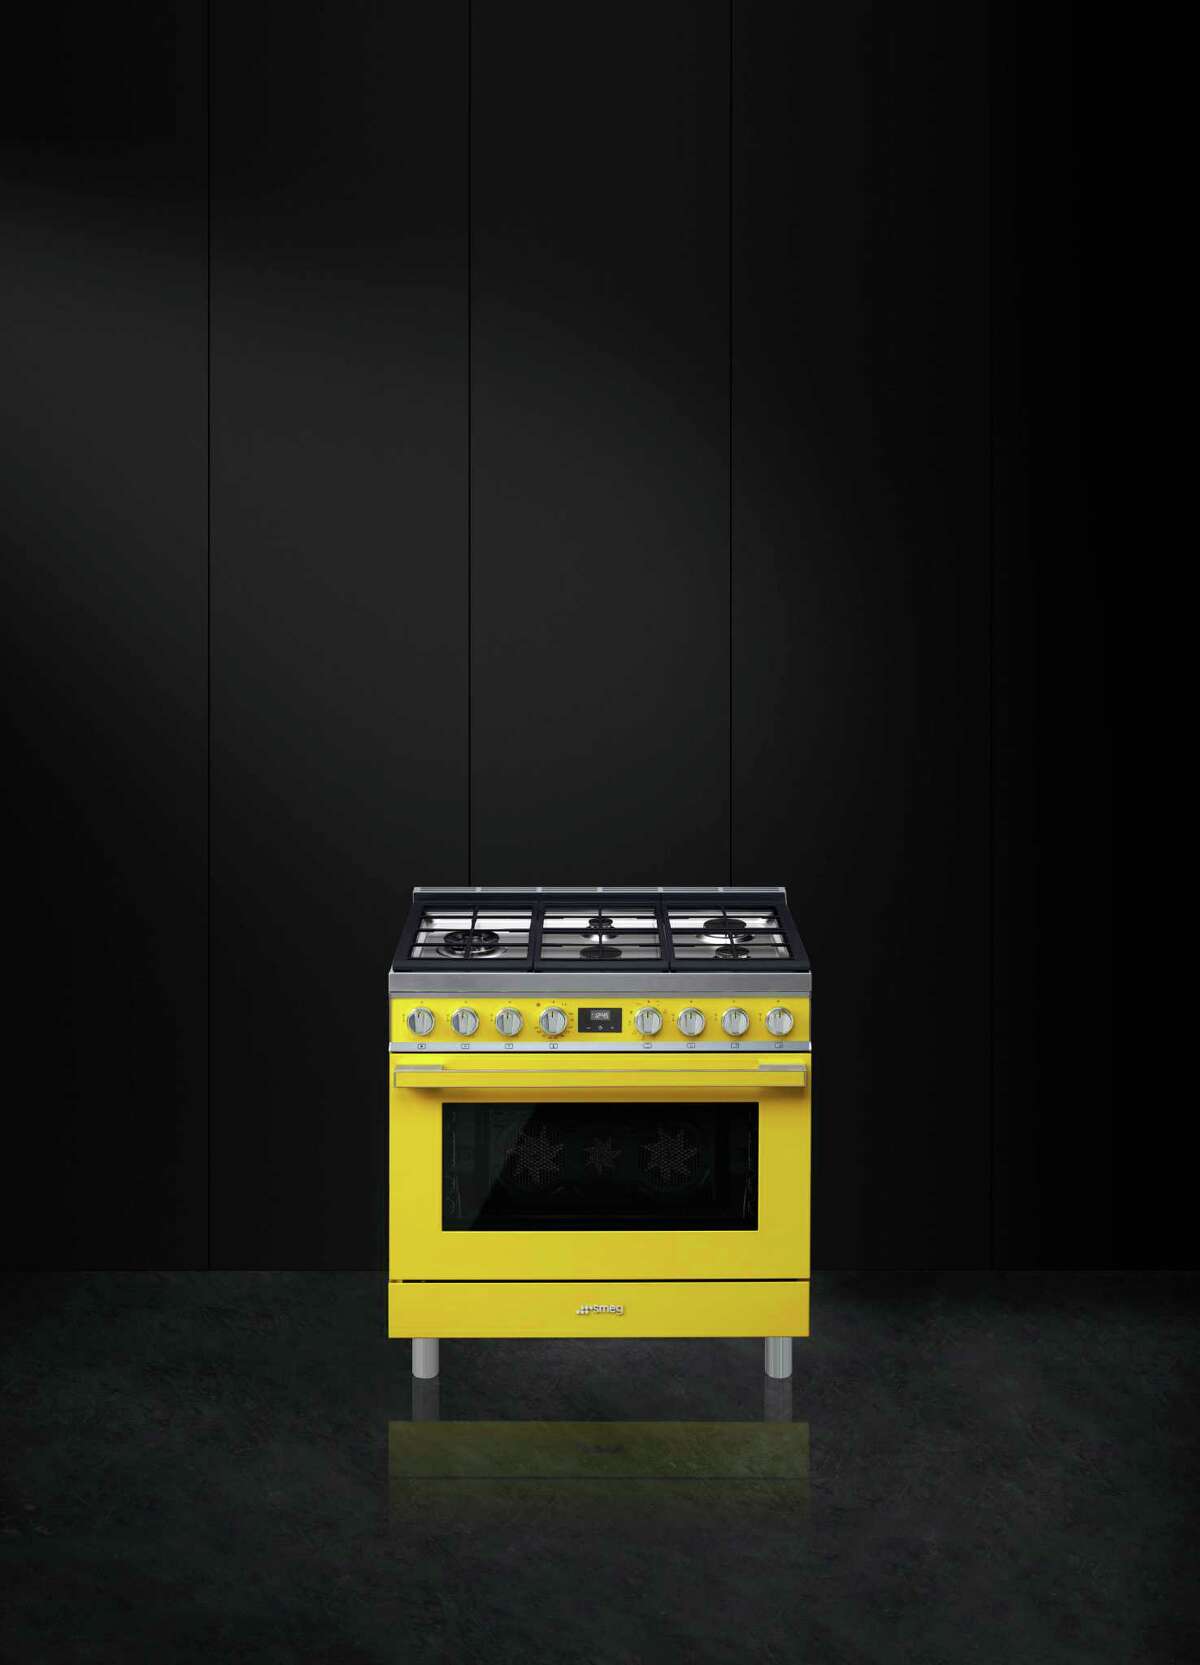 Smeg brand appliances now come in bright colors such as this yellow range. this year they'll launch a liine of matching range hoods that will sell for $3,999 ($3,499 for the stainless steel version).